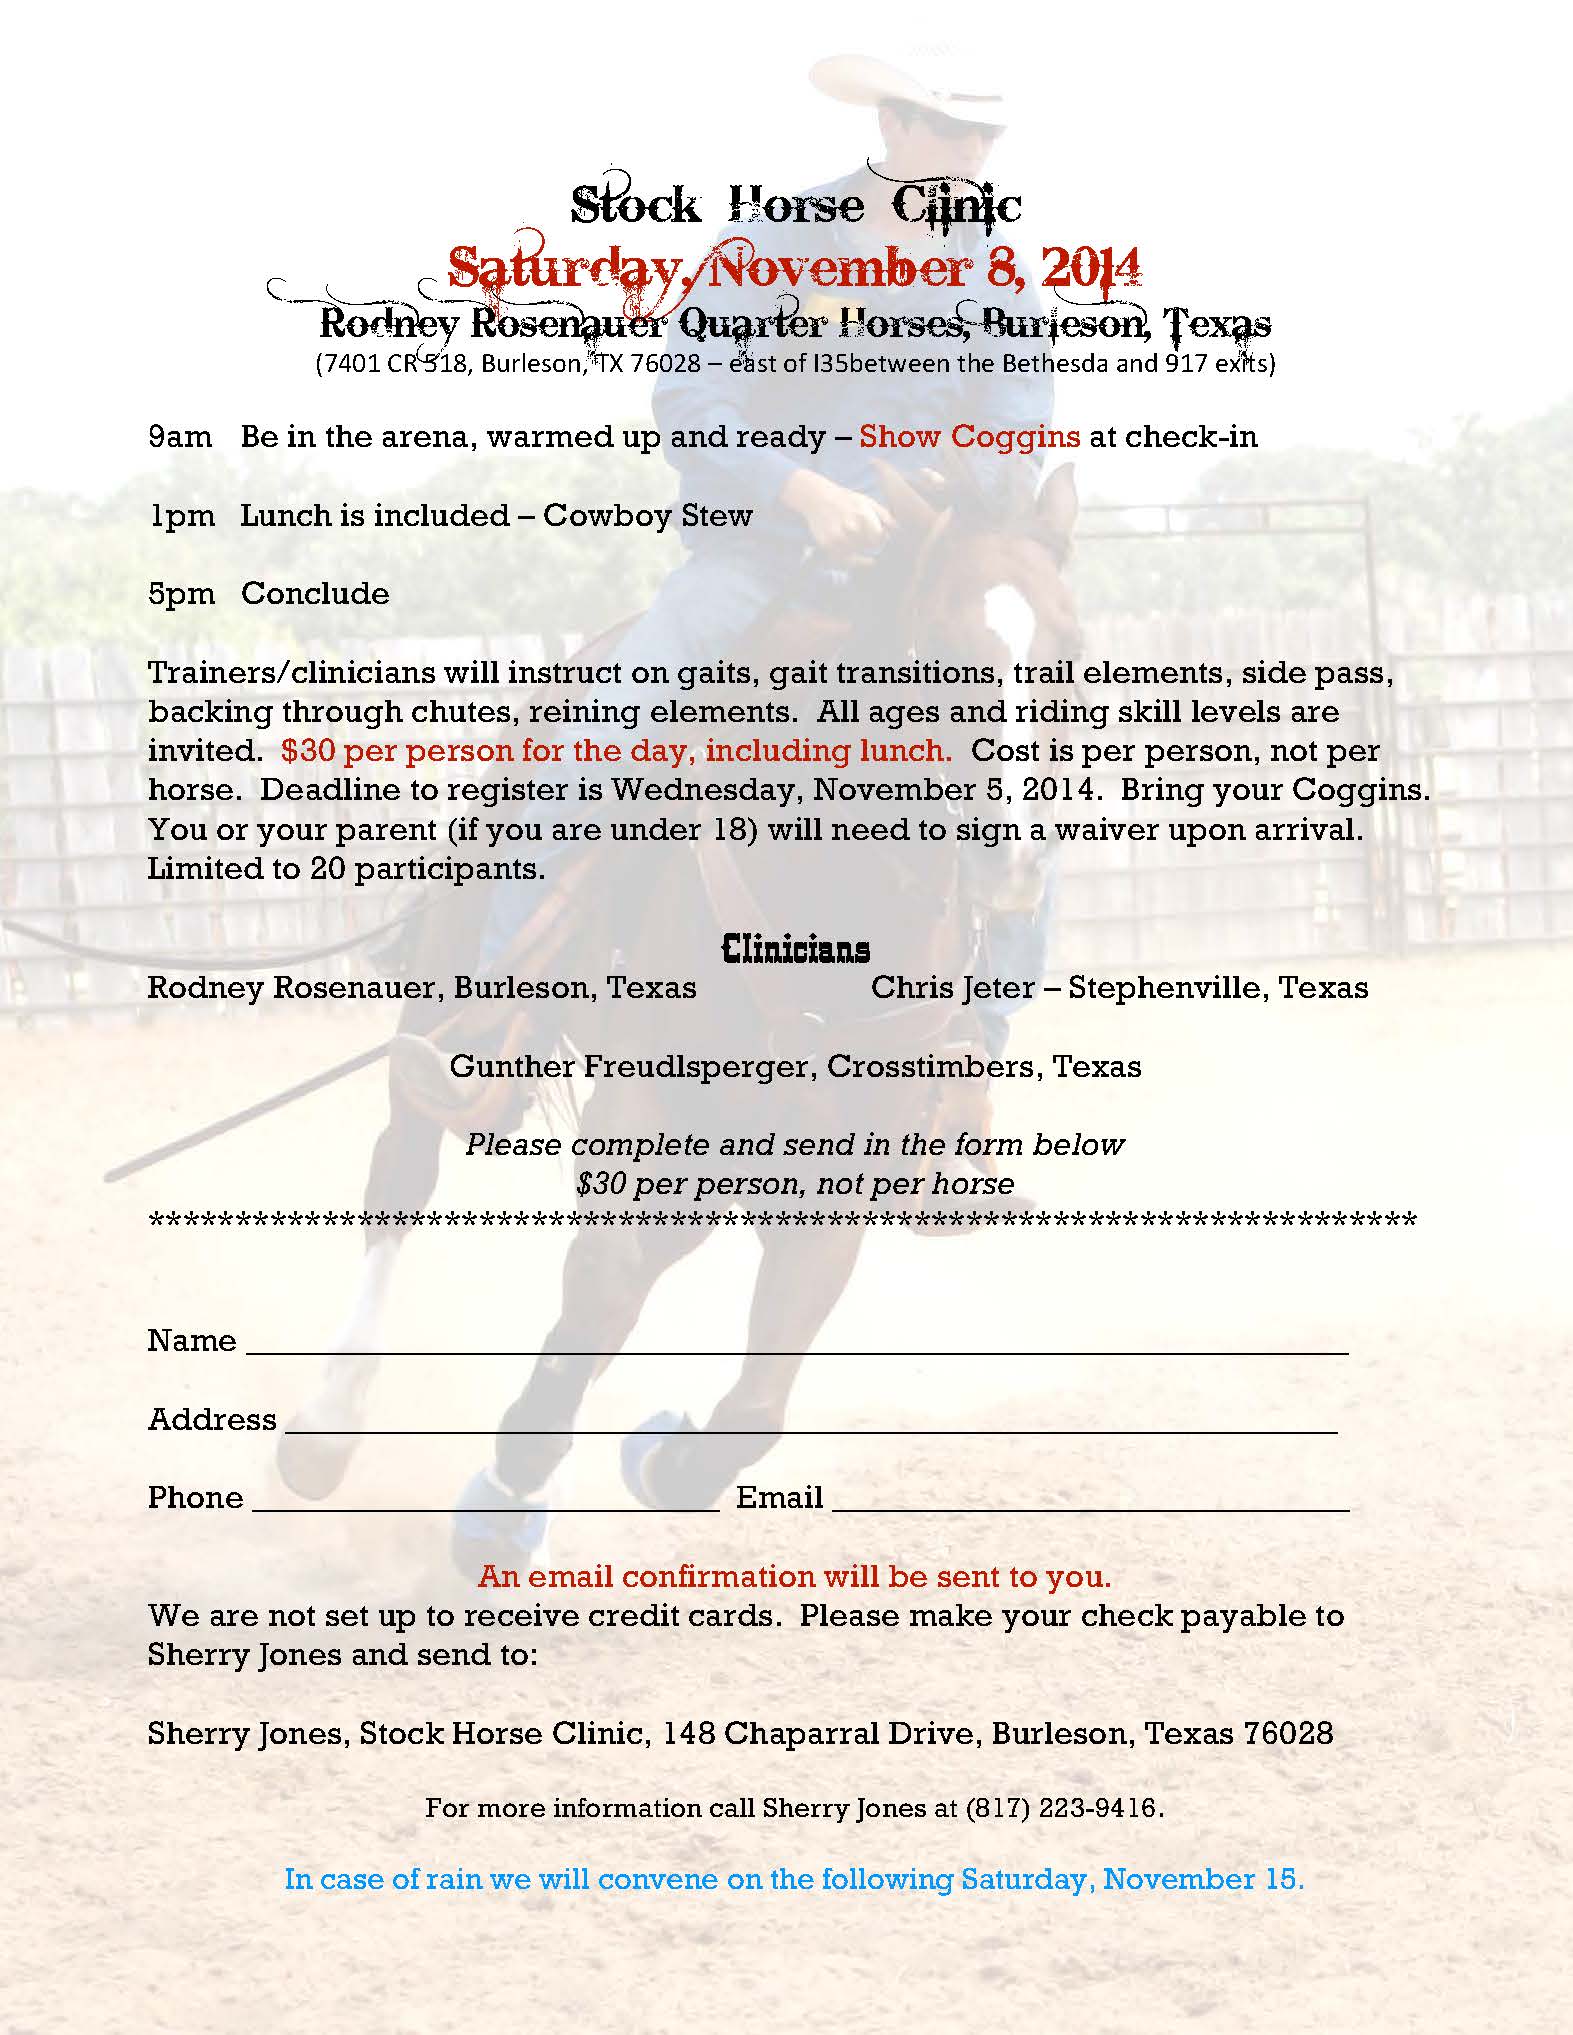 Stock Horse Clinic flyer and form Nov 2014